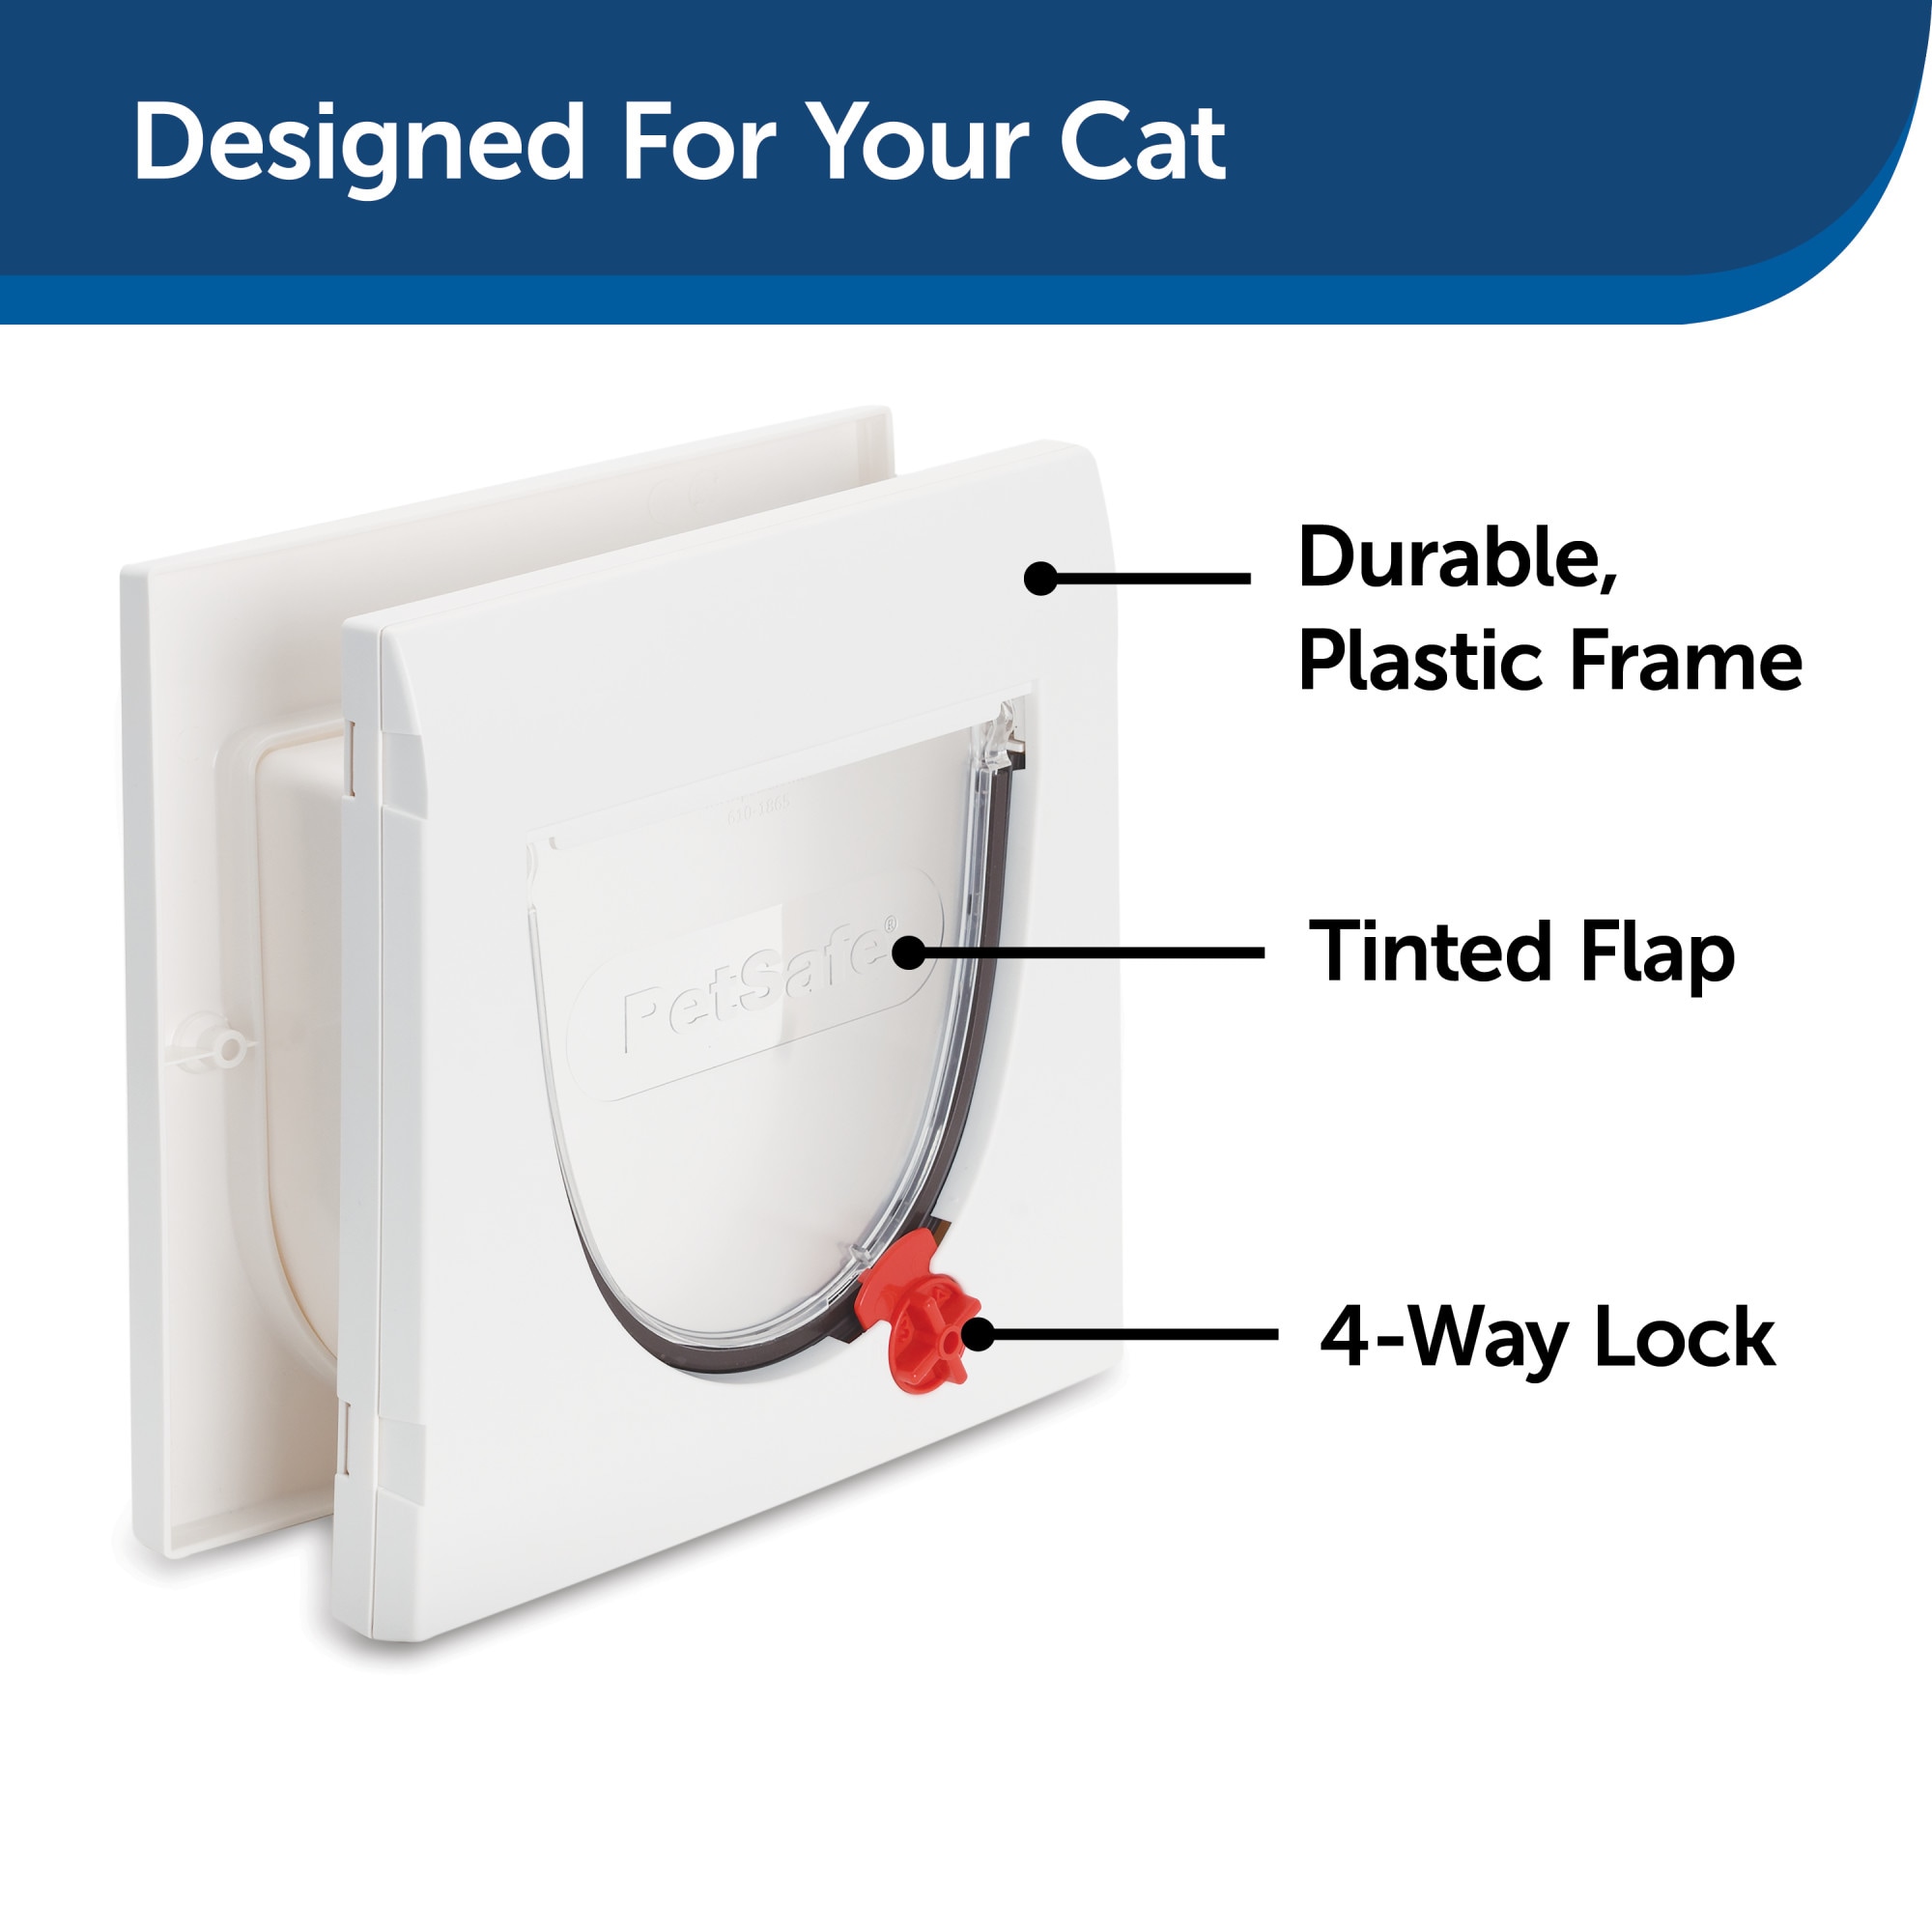 PetSafe 14-1/4-in x 21-1/16-in White Plastic Large Dog/Cat Door for Wall in  the Pet Doors department at